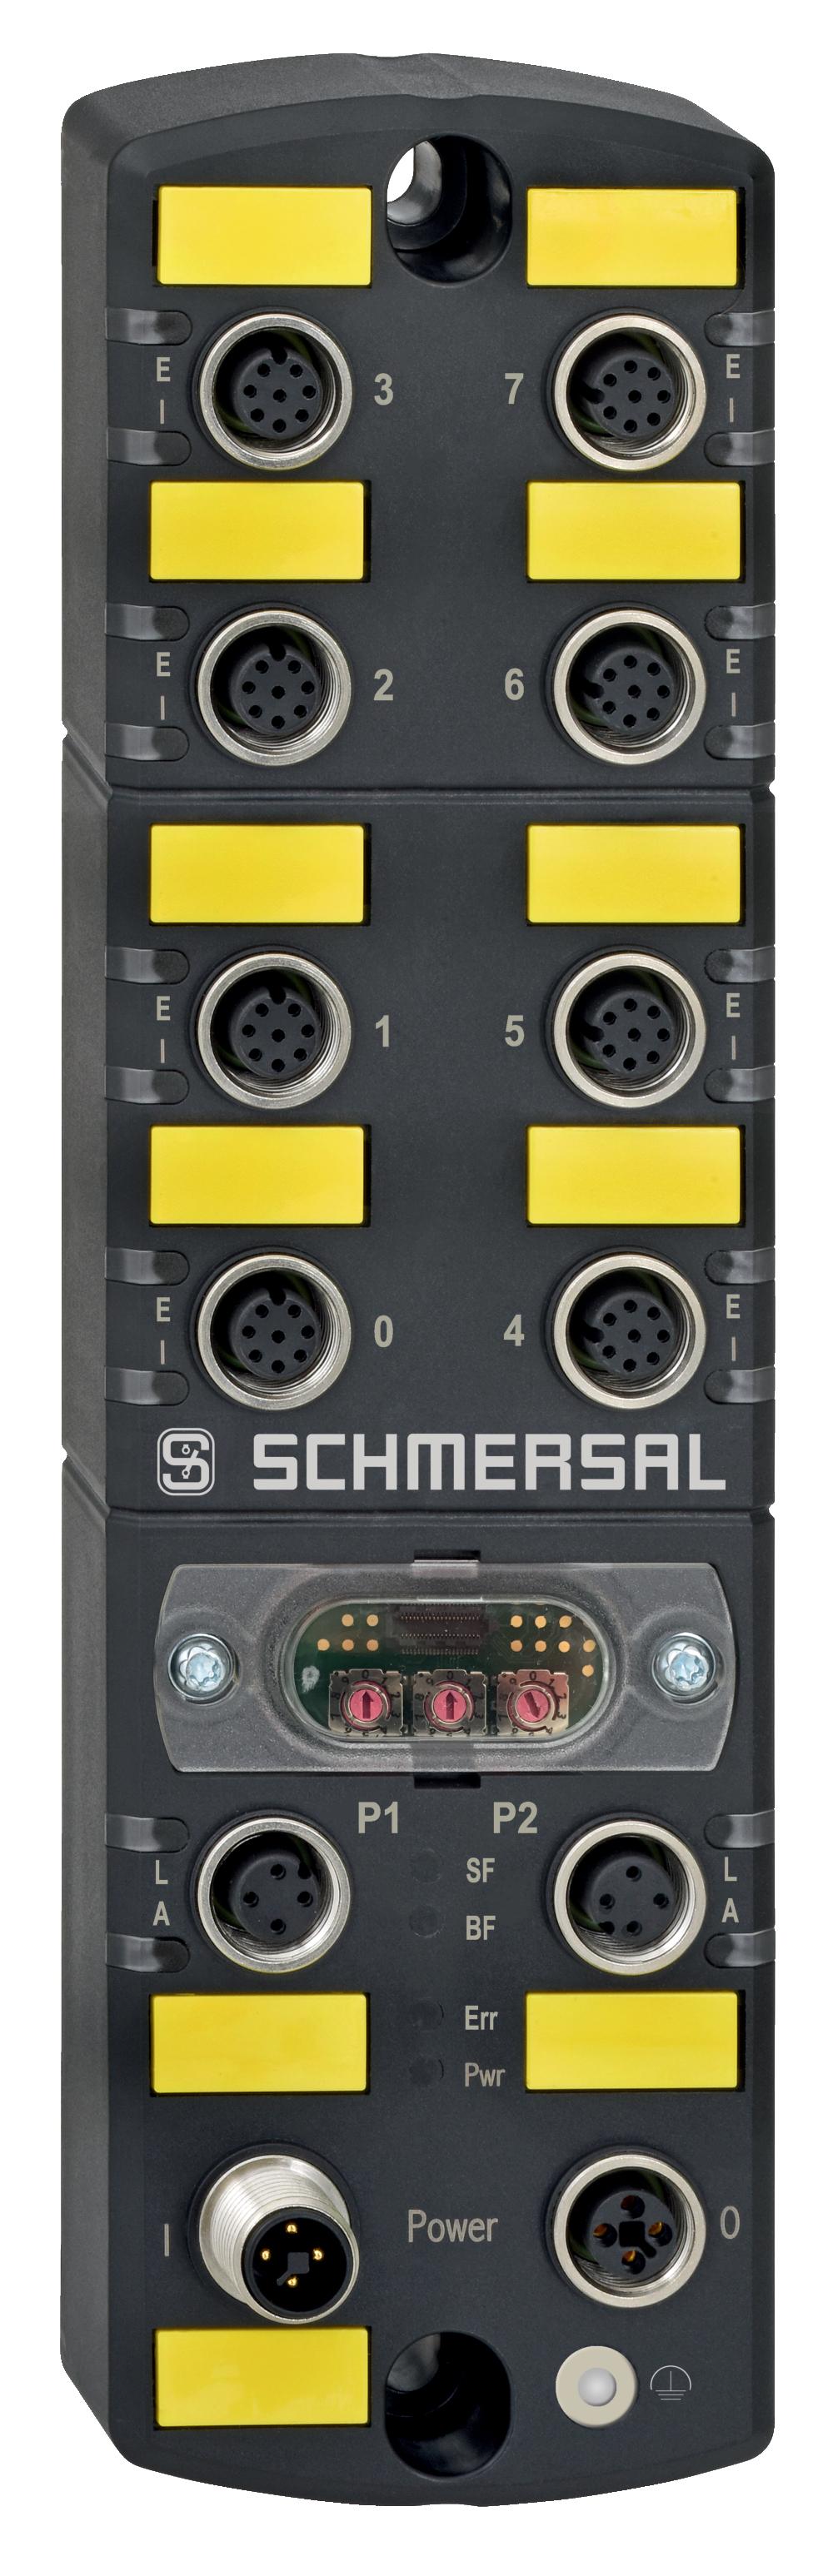 Schmersal SFB-PN-IRT-8M12-IOP Safety-Fieldboxes; Safety fieldbox for PROFINET/PROFIsafe; For connection of up to 8 safety switching devices; Integrated dual-port switch, IRT-capable; Protection class IP67